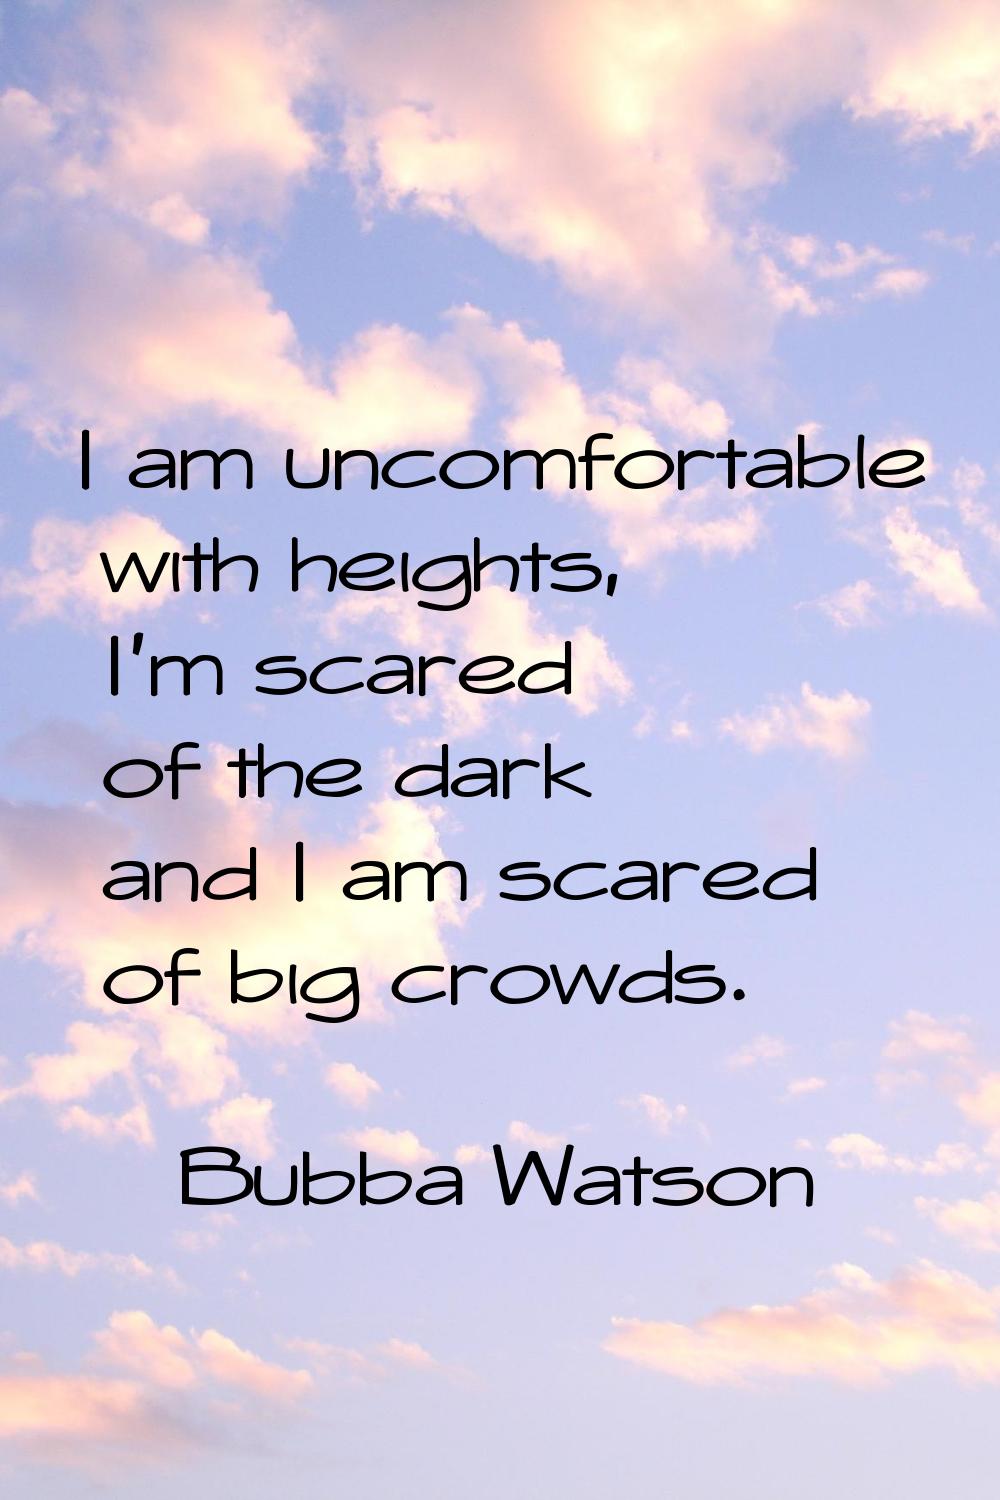 I am uncomfortable with heights, I'm scared of the dark and I am scared of big crowds.